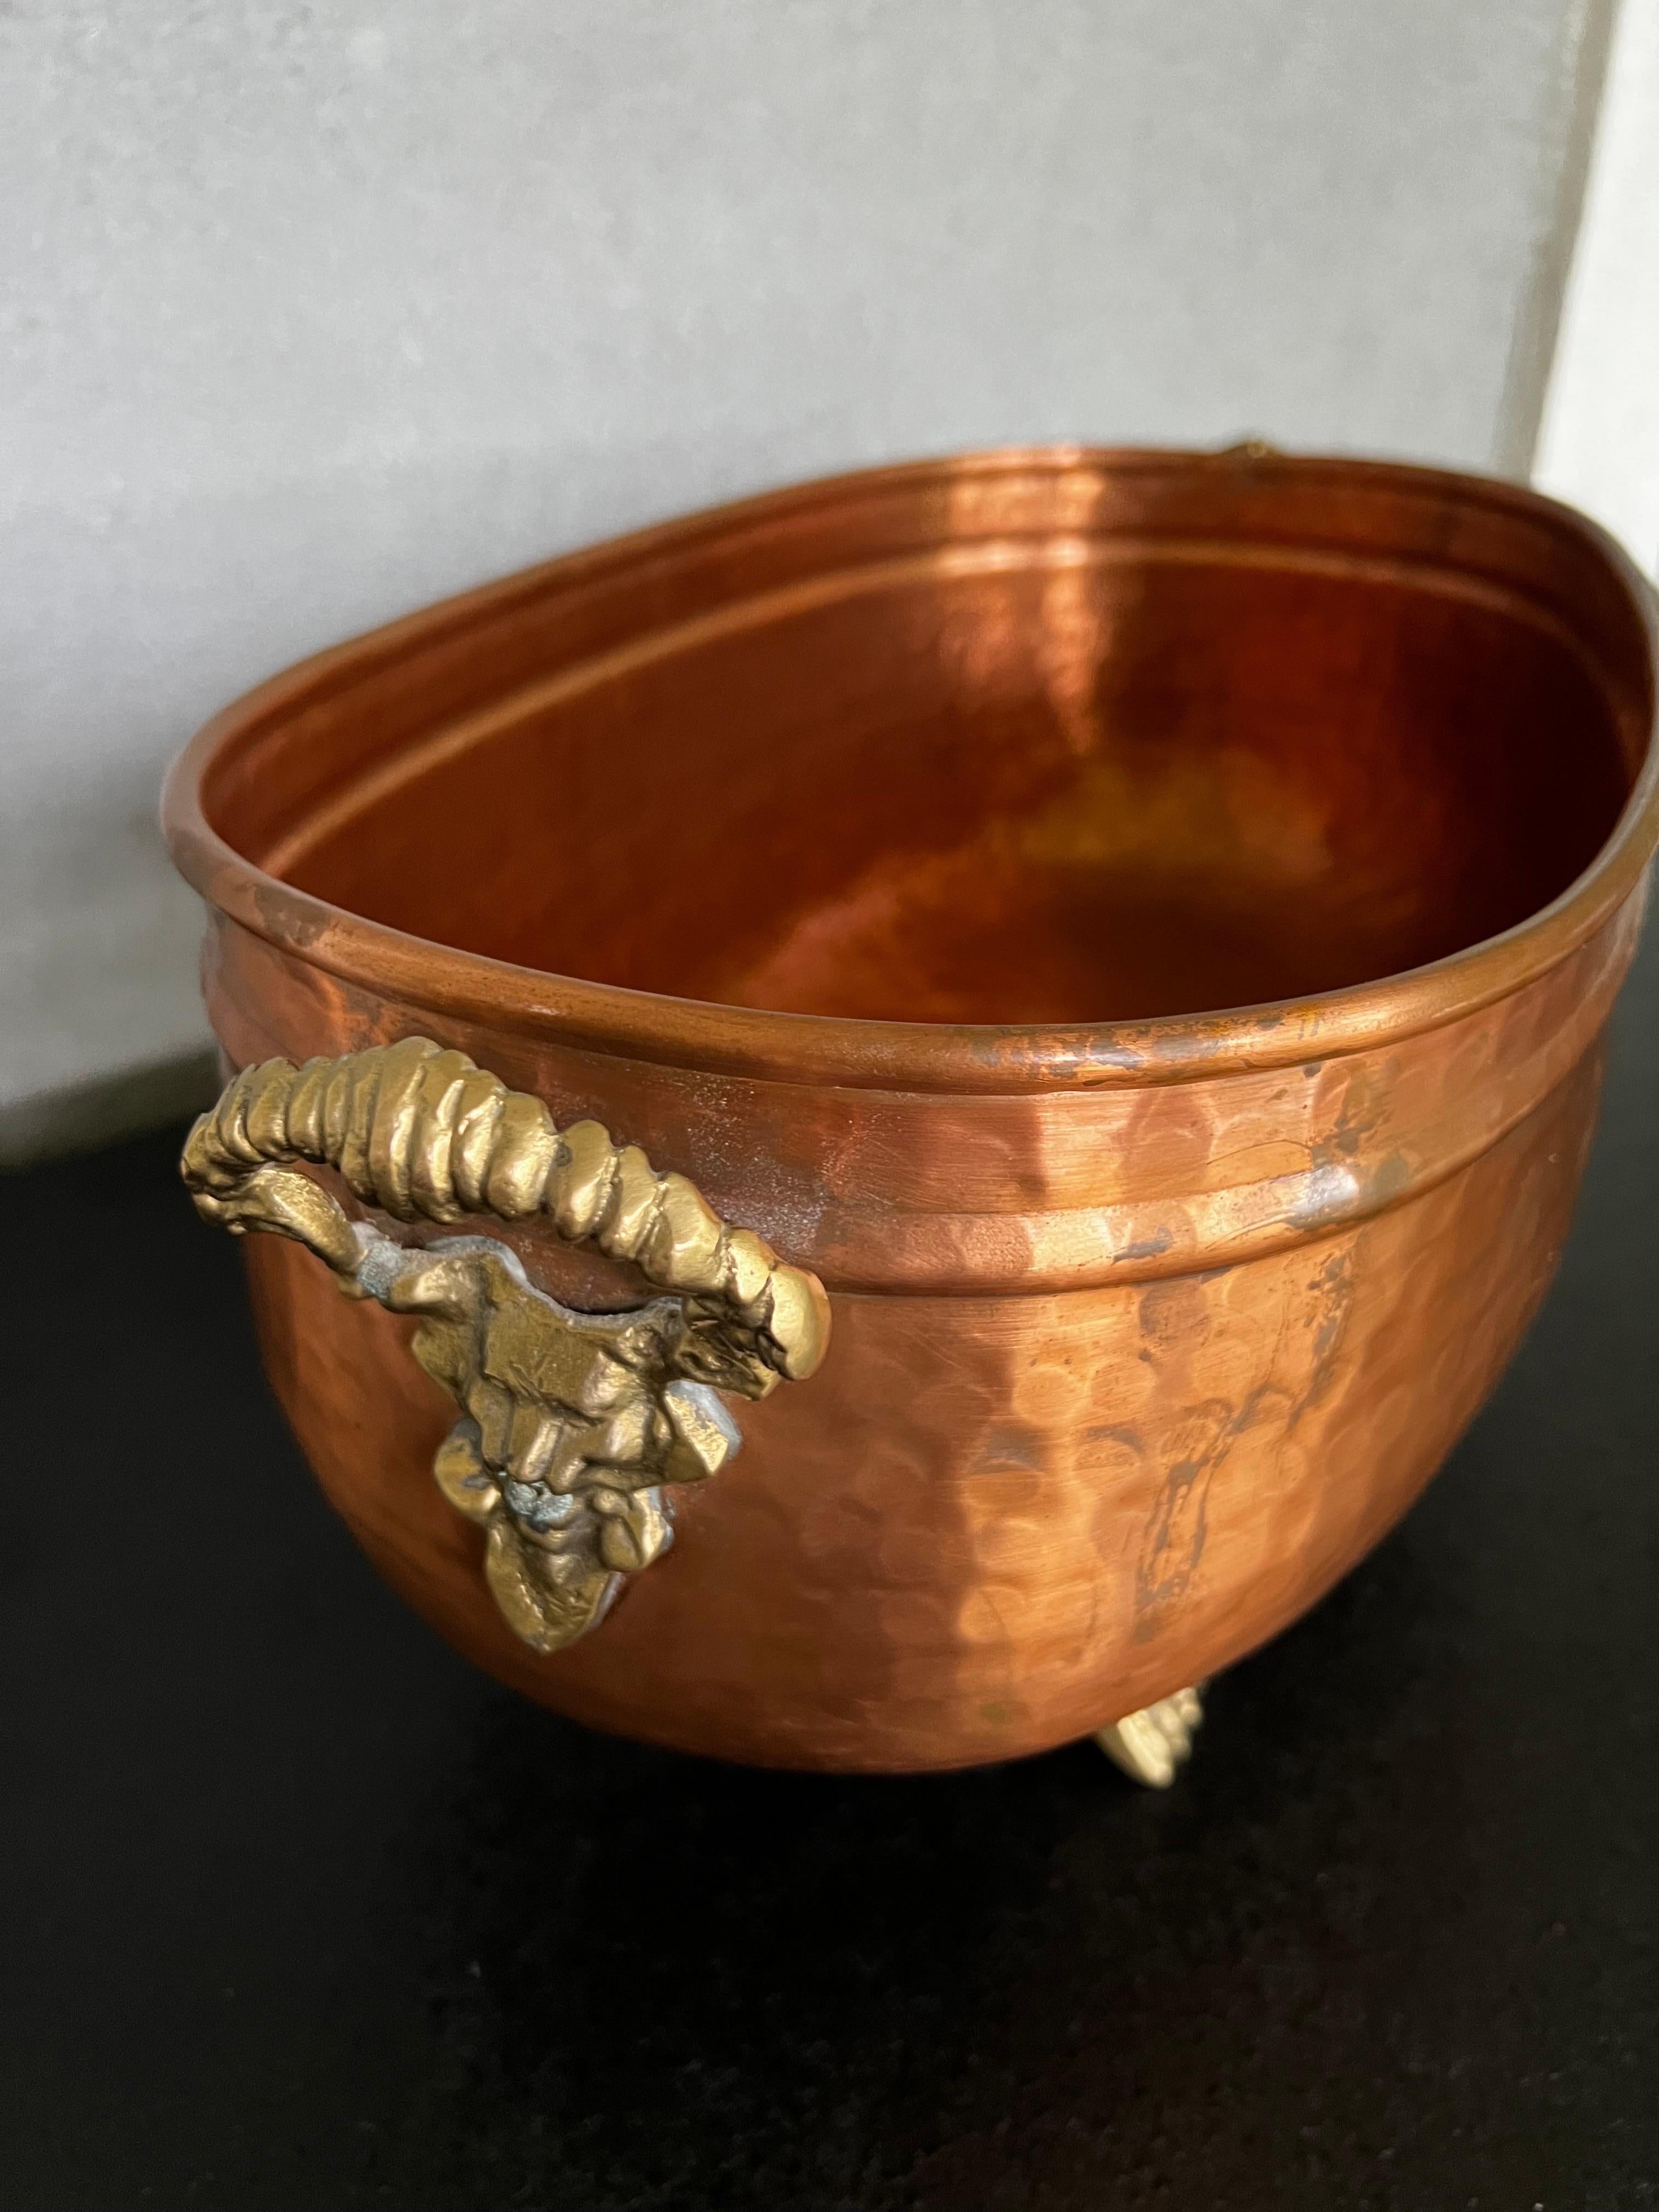 Beautiful hammered copper with brass feet and handles jardiniere, that can be use for ice beverages, plants  or as centerpiece with your favorite items 
Nice details on the elevated feet gives this jardiniere more sophisticated presence 
Its light